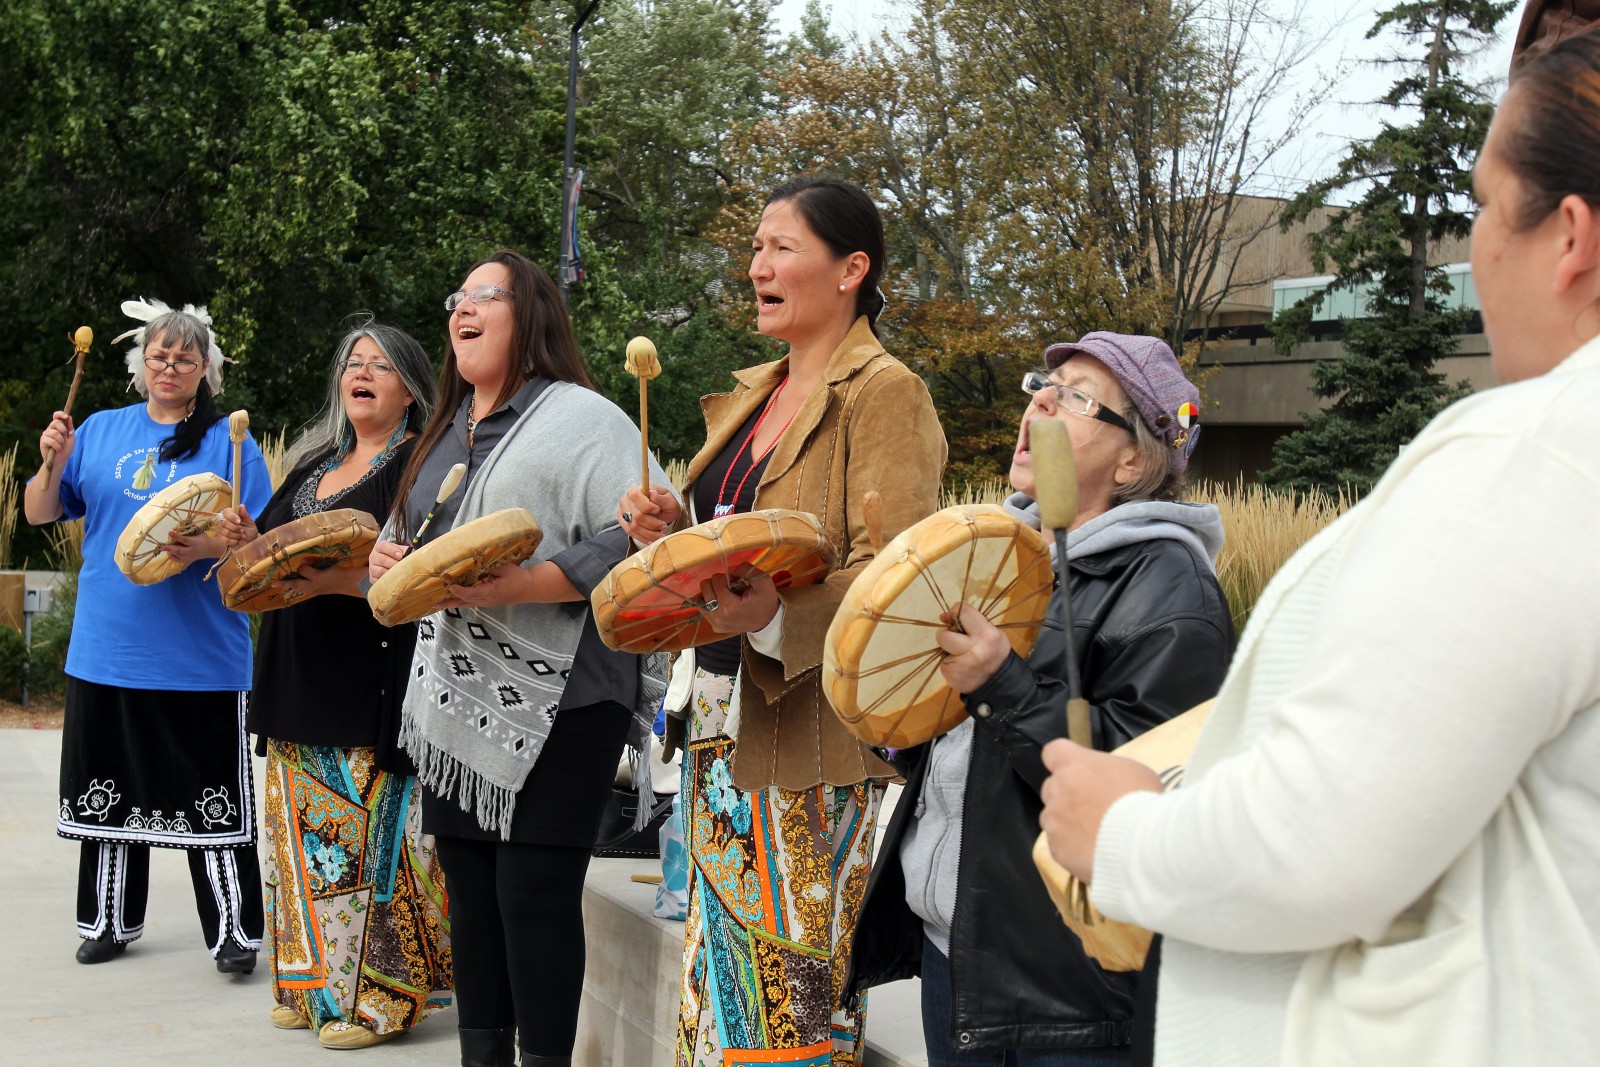 Women perform the Strong Women's Song Friday in front of the Brock statue during the Sisters in Spirit Vigil for Missing and Murdered Aboriginal Women and Girls.